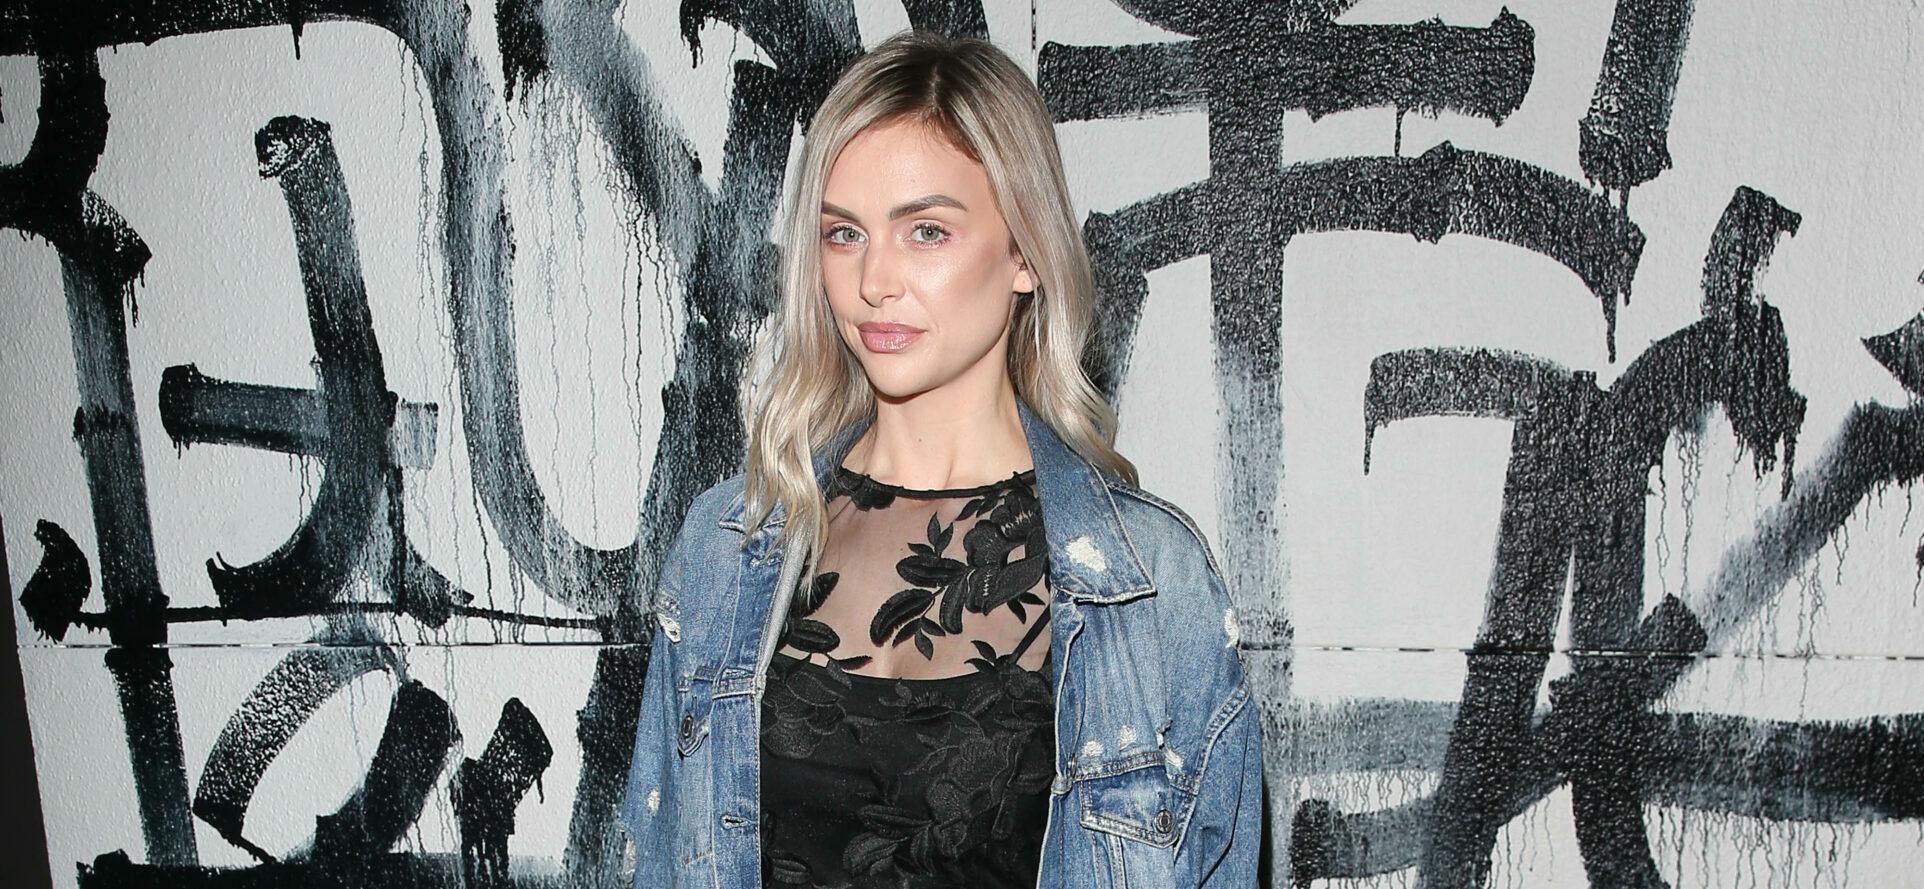 ‘Vanderpump Rules’ Lala Kent Missed Katie Maloney’s Bday, Now She’s Got Problems